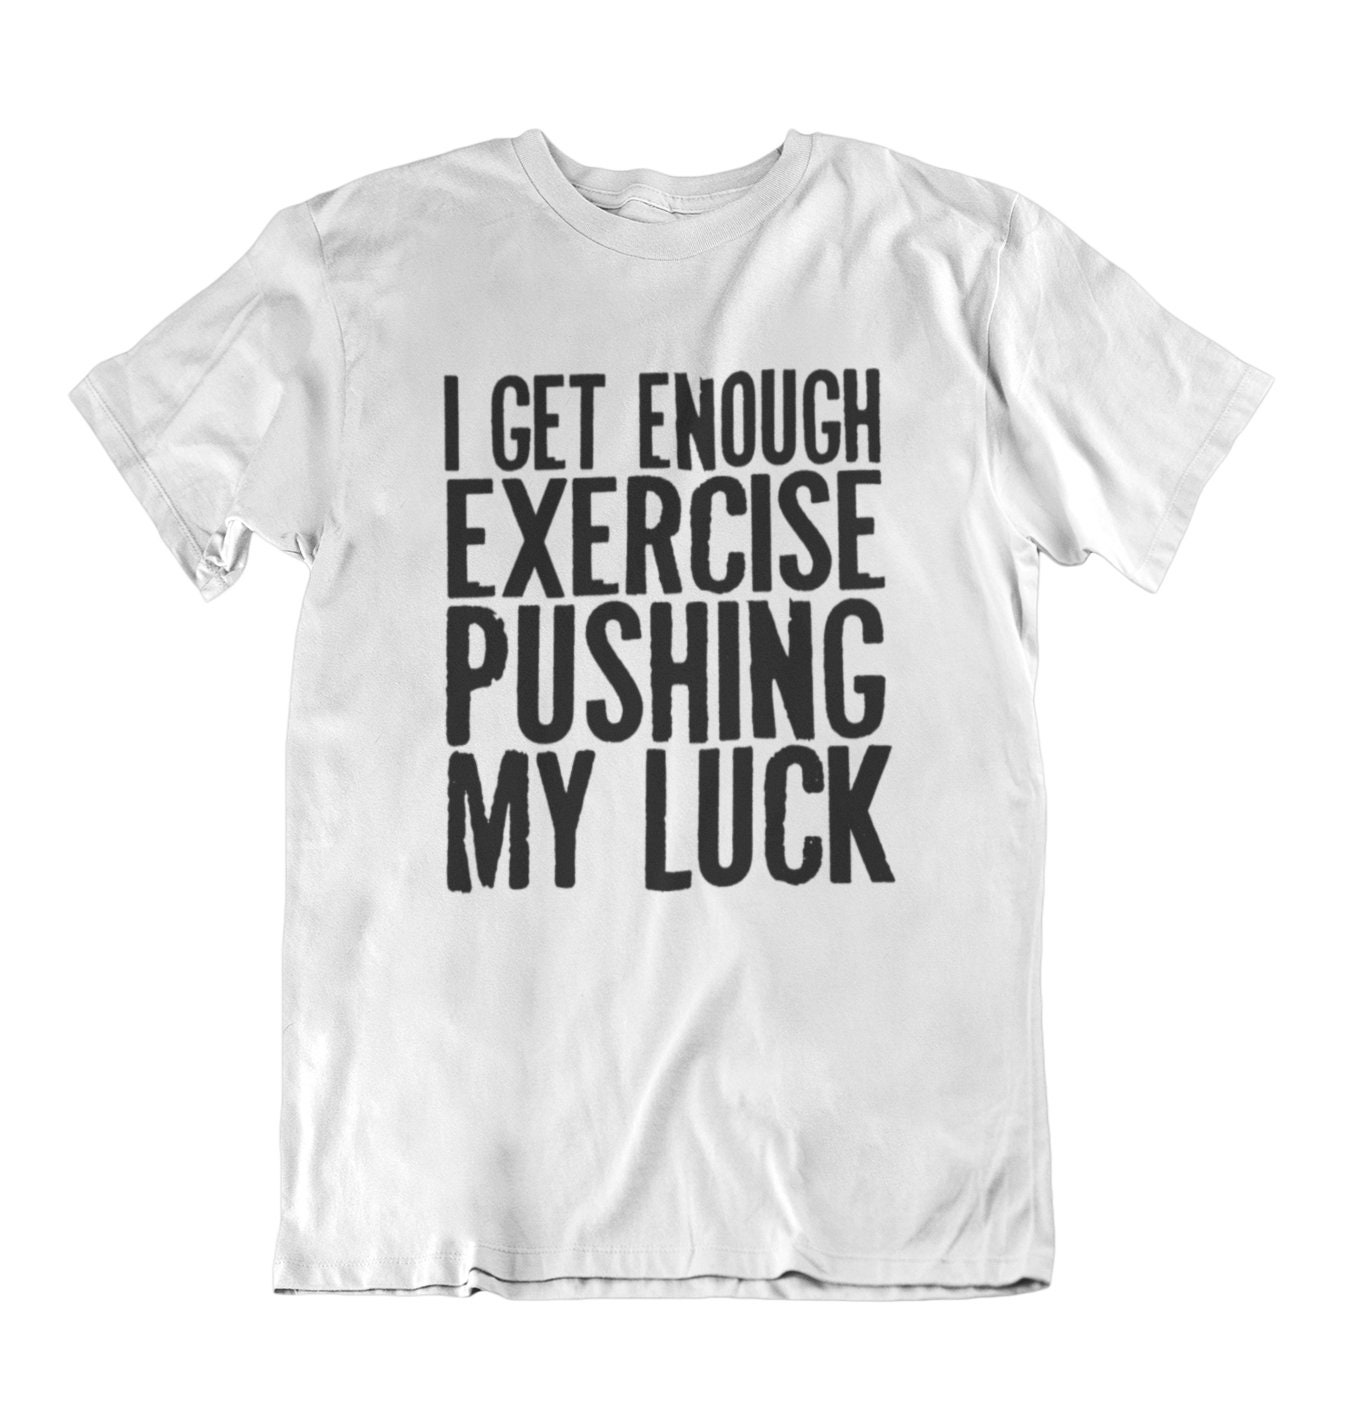 I Get Enough Exercise Pushing My Luck Funny Adult Tee Shirt | Etsy